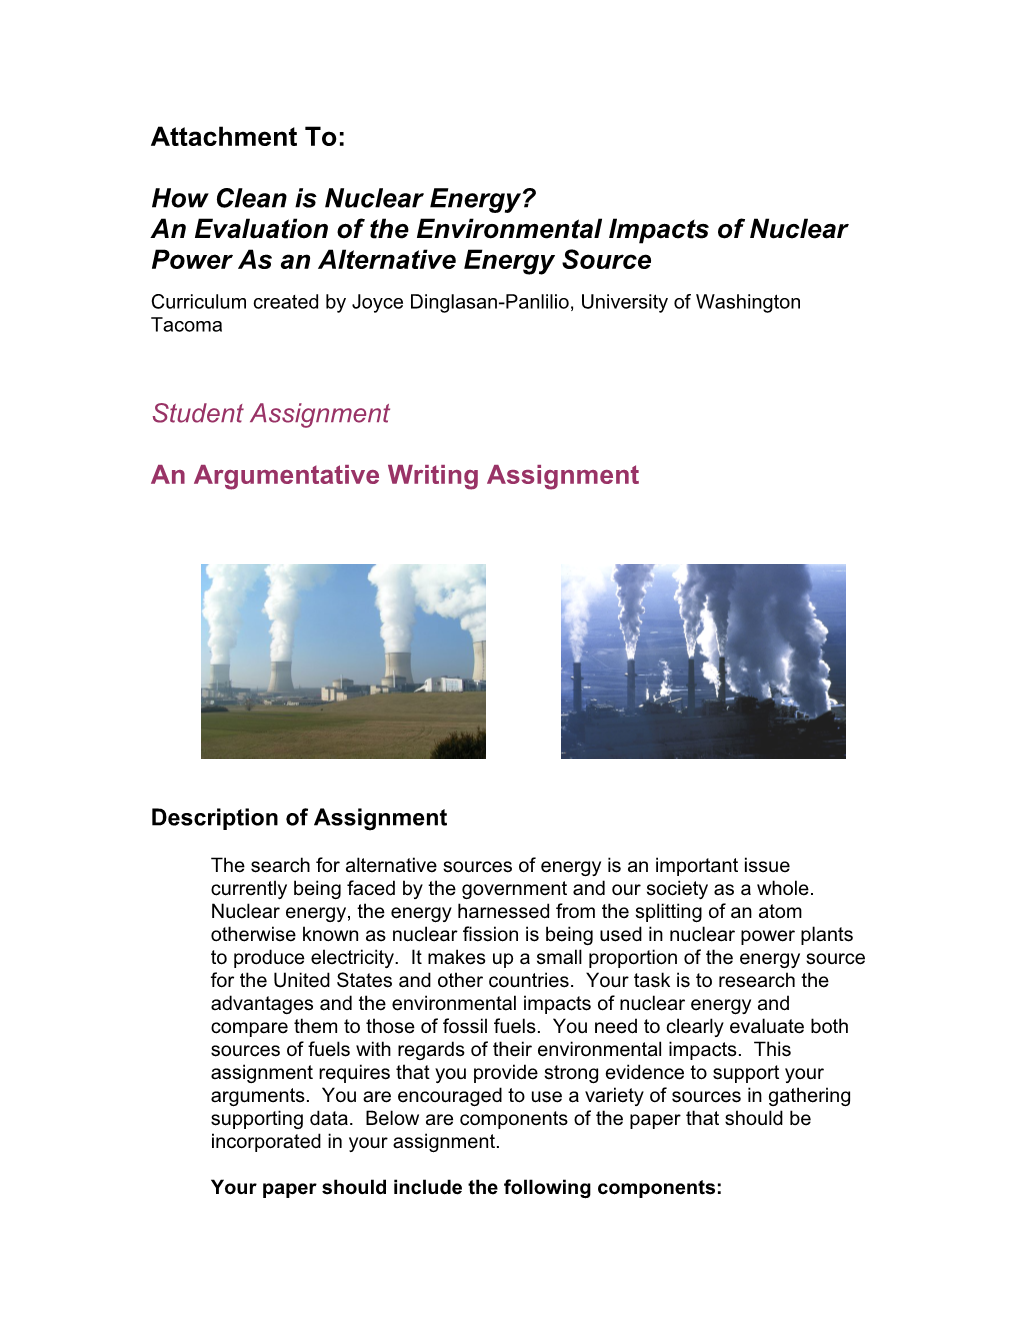 How Clean Is Nuclear Energy?